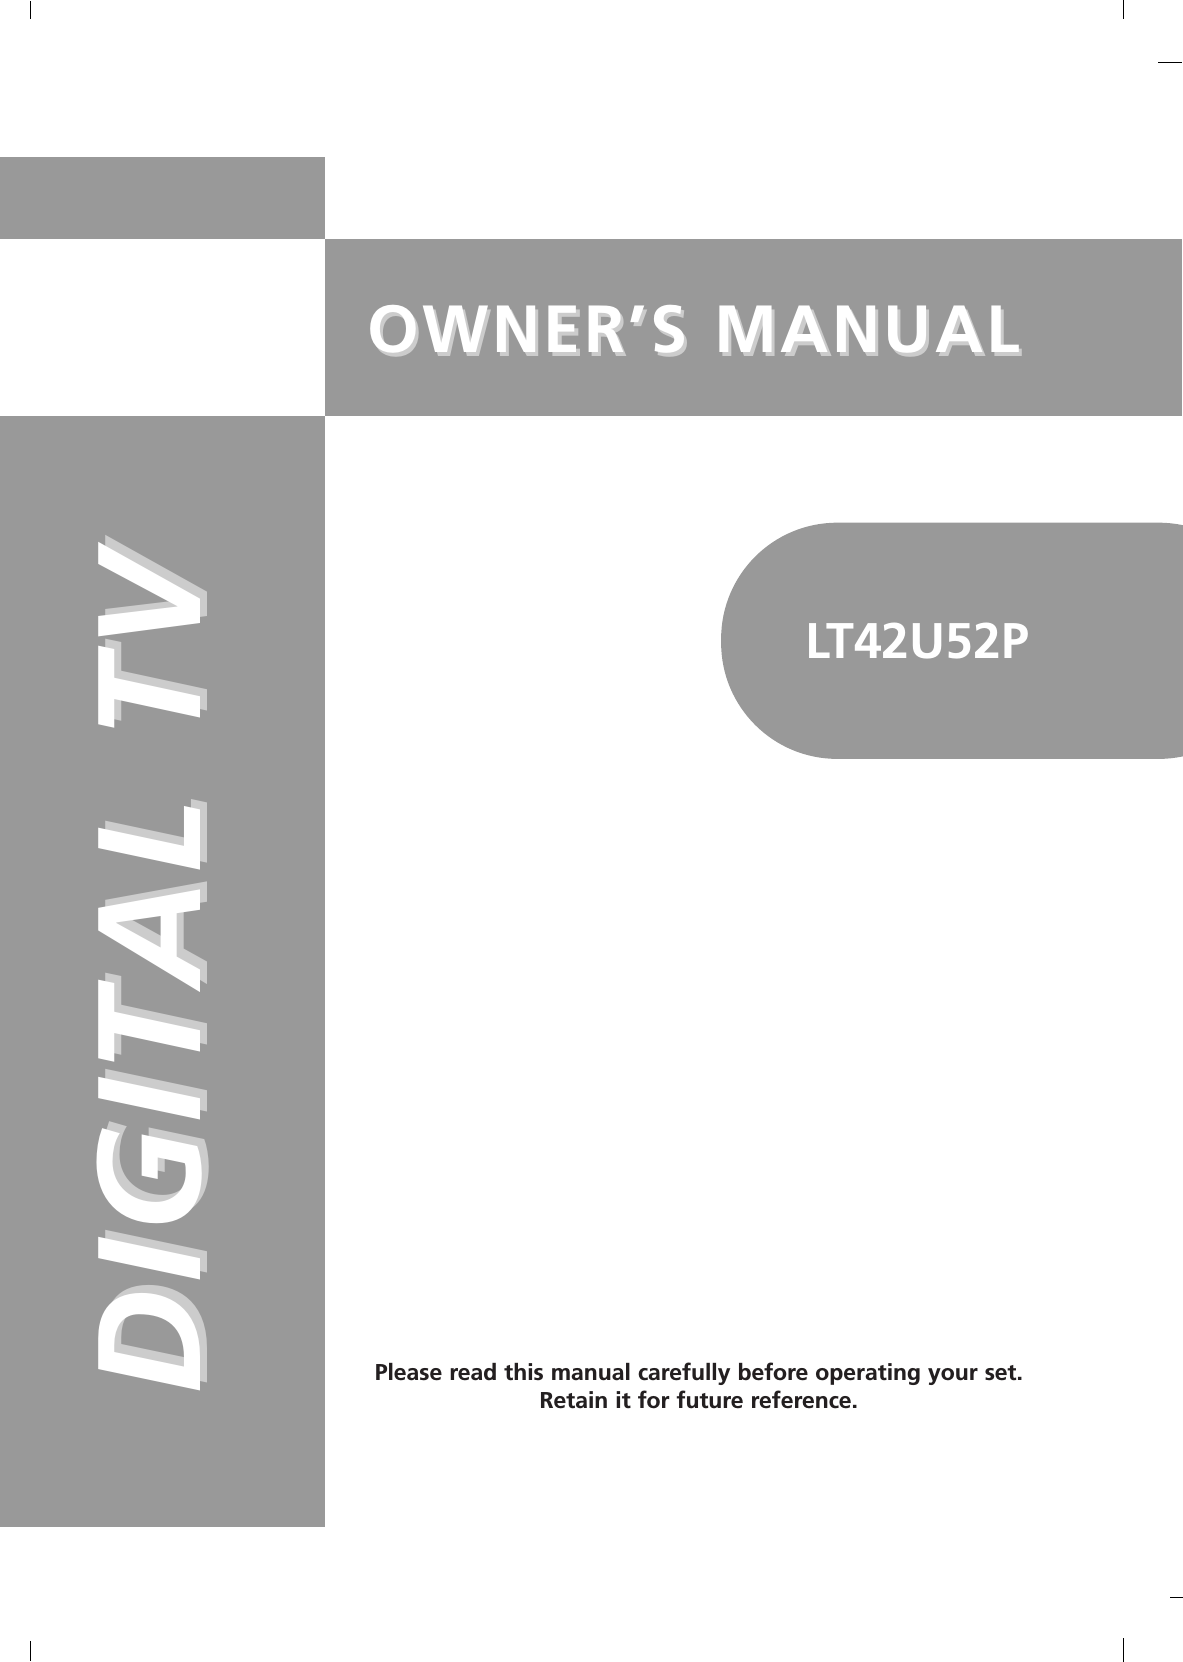 OWNER’S MANUALOWNER’S MANUALDIGITAL TVDIGITAL TVPlease read this manual carefully before operating your set.Retain it for future reference.LT42U52P